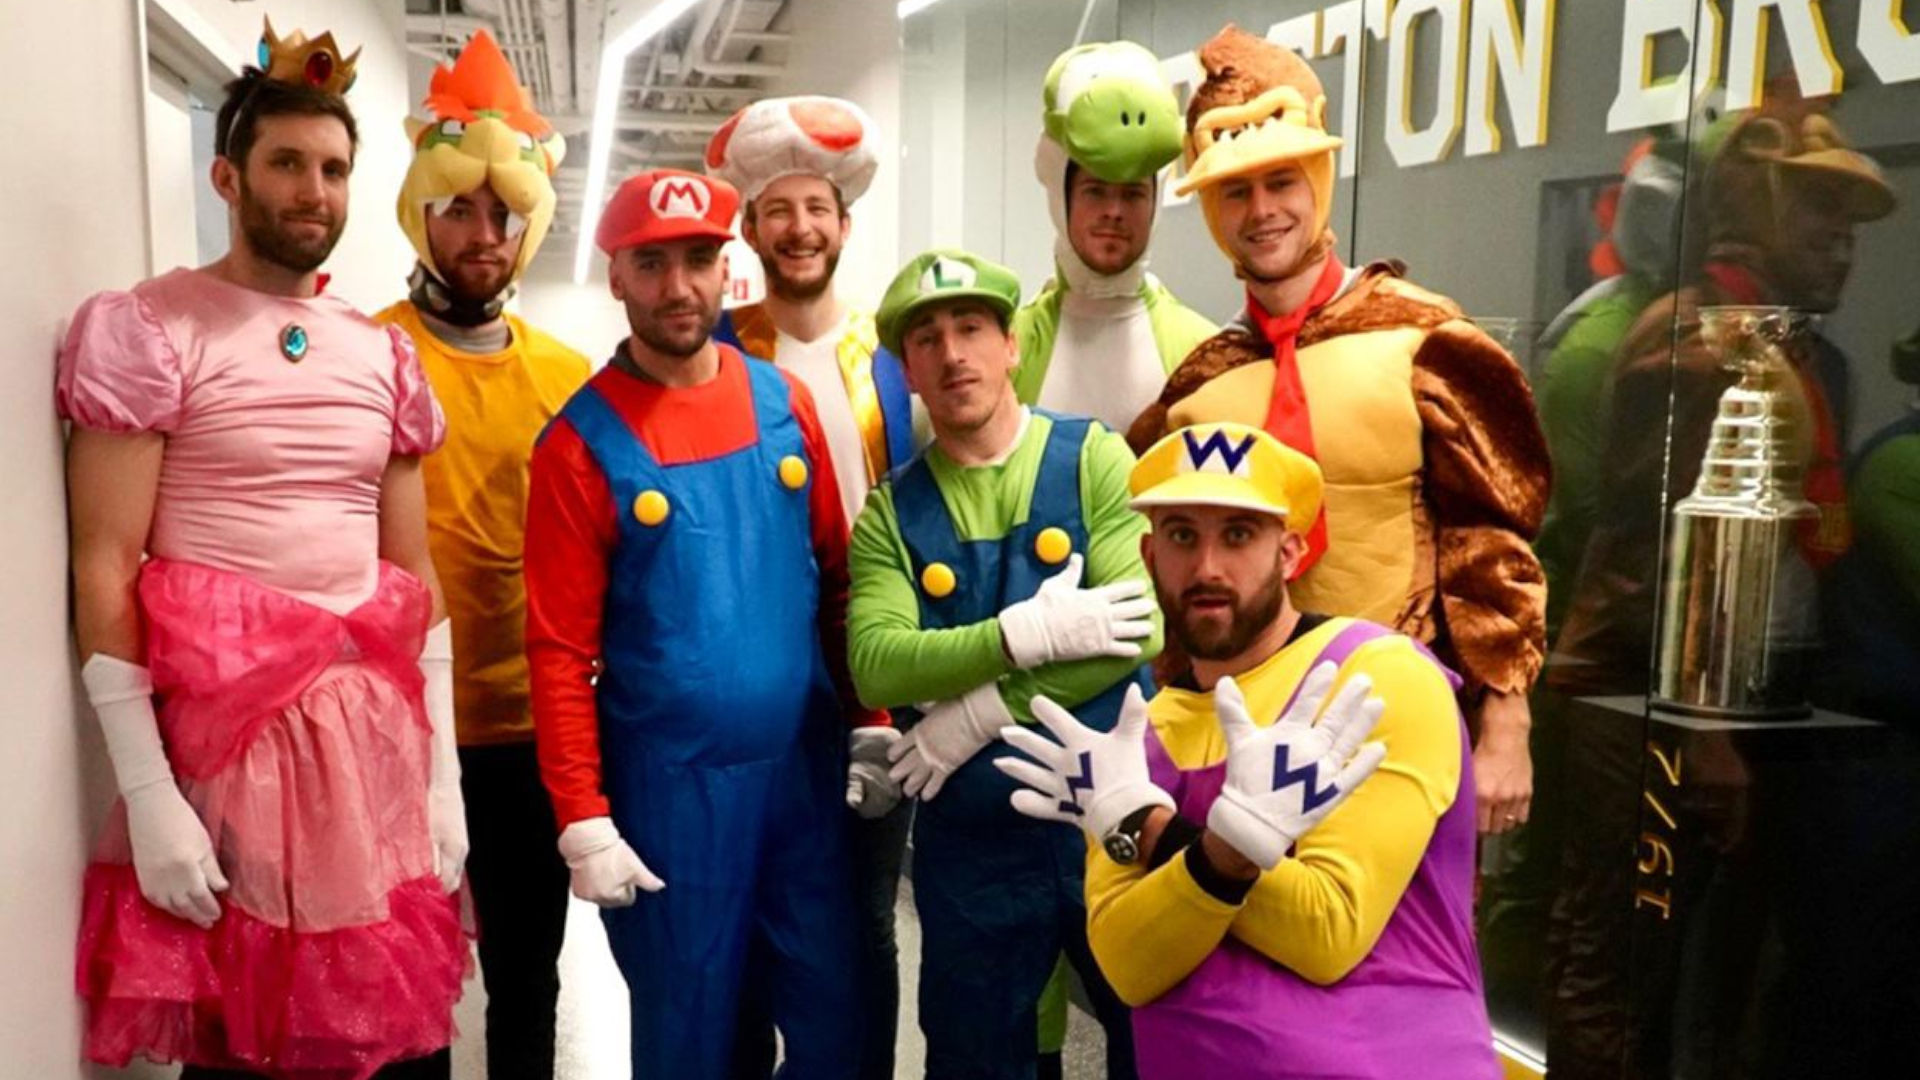 Mario Halloween costumes are coming out for the spooky season